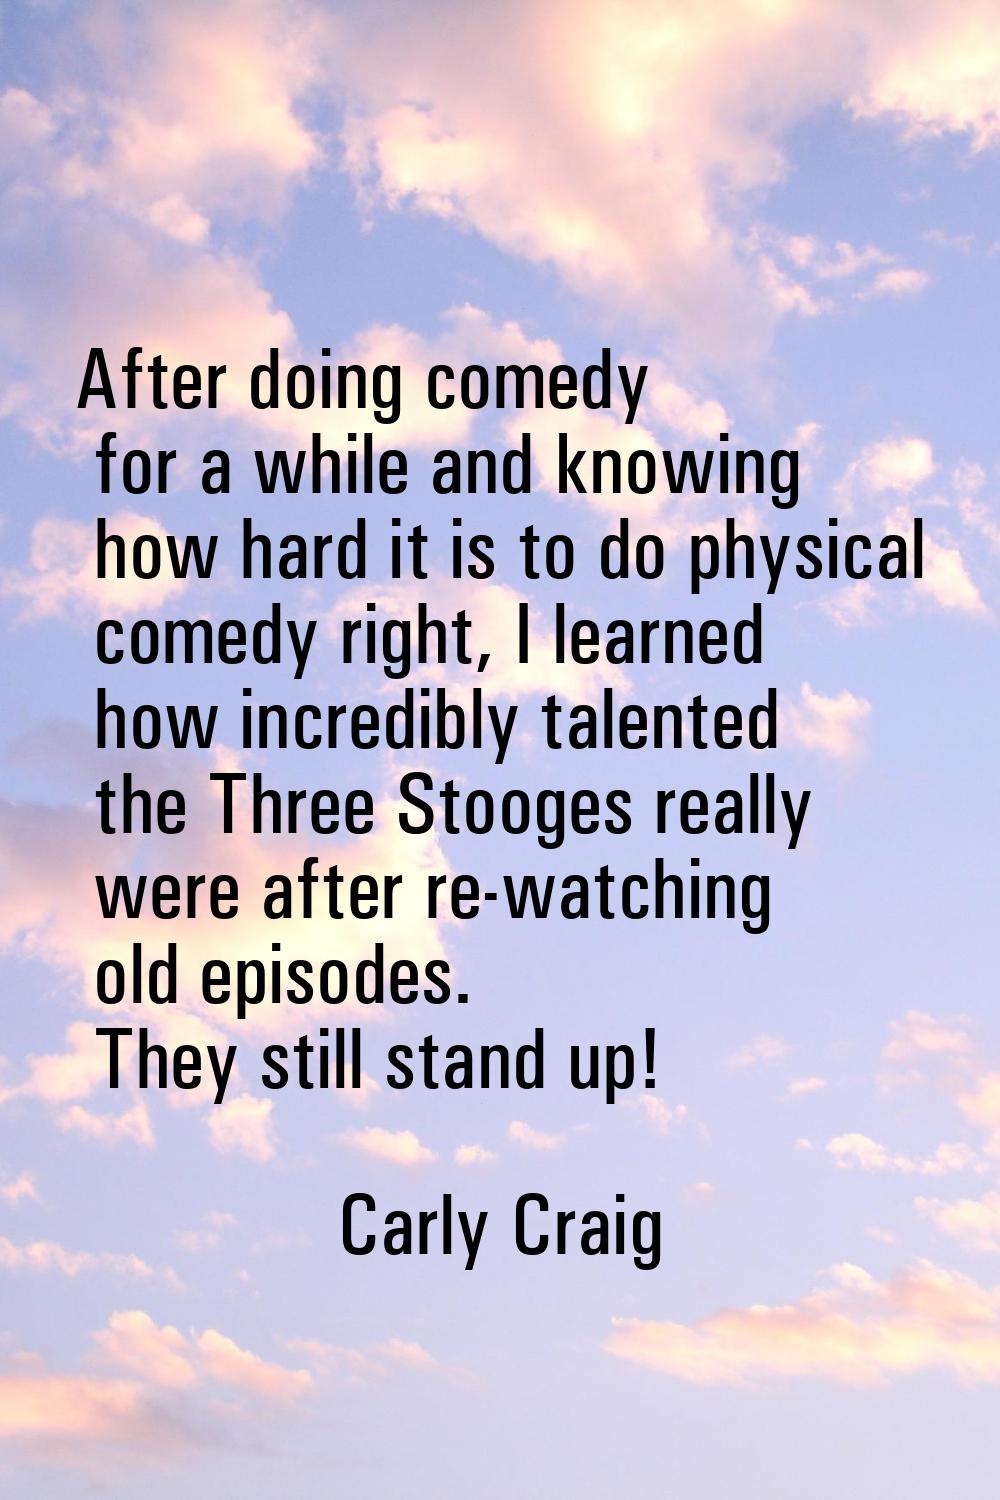 After doing comedy for a while and knowing how hard it is to do physical comedy right, I learned ho